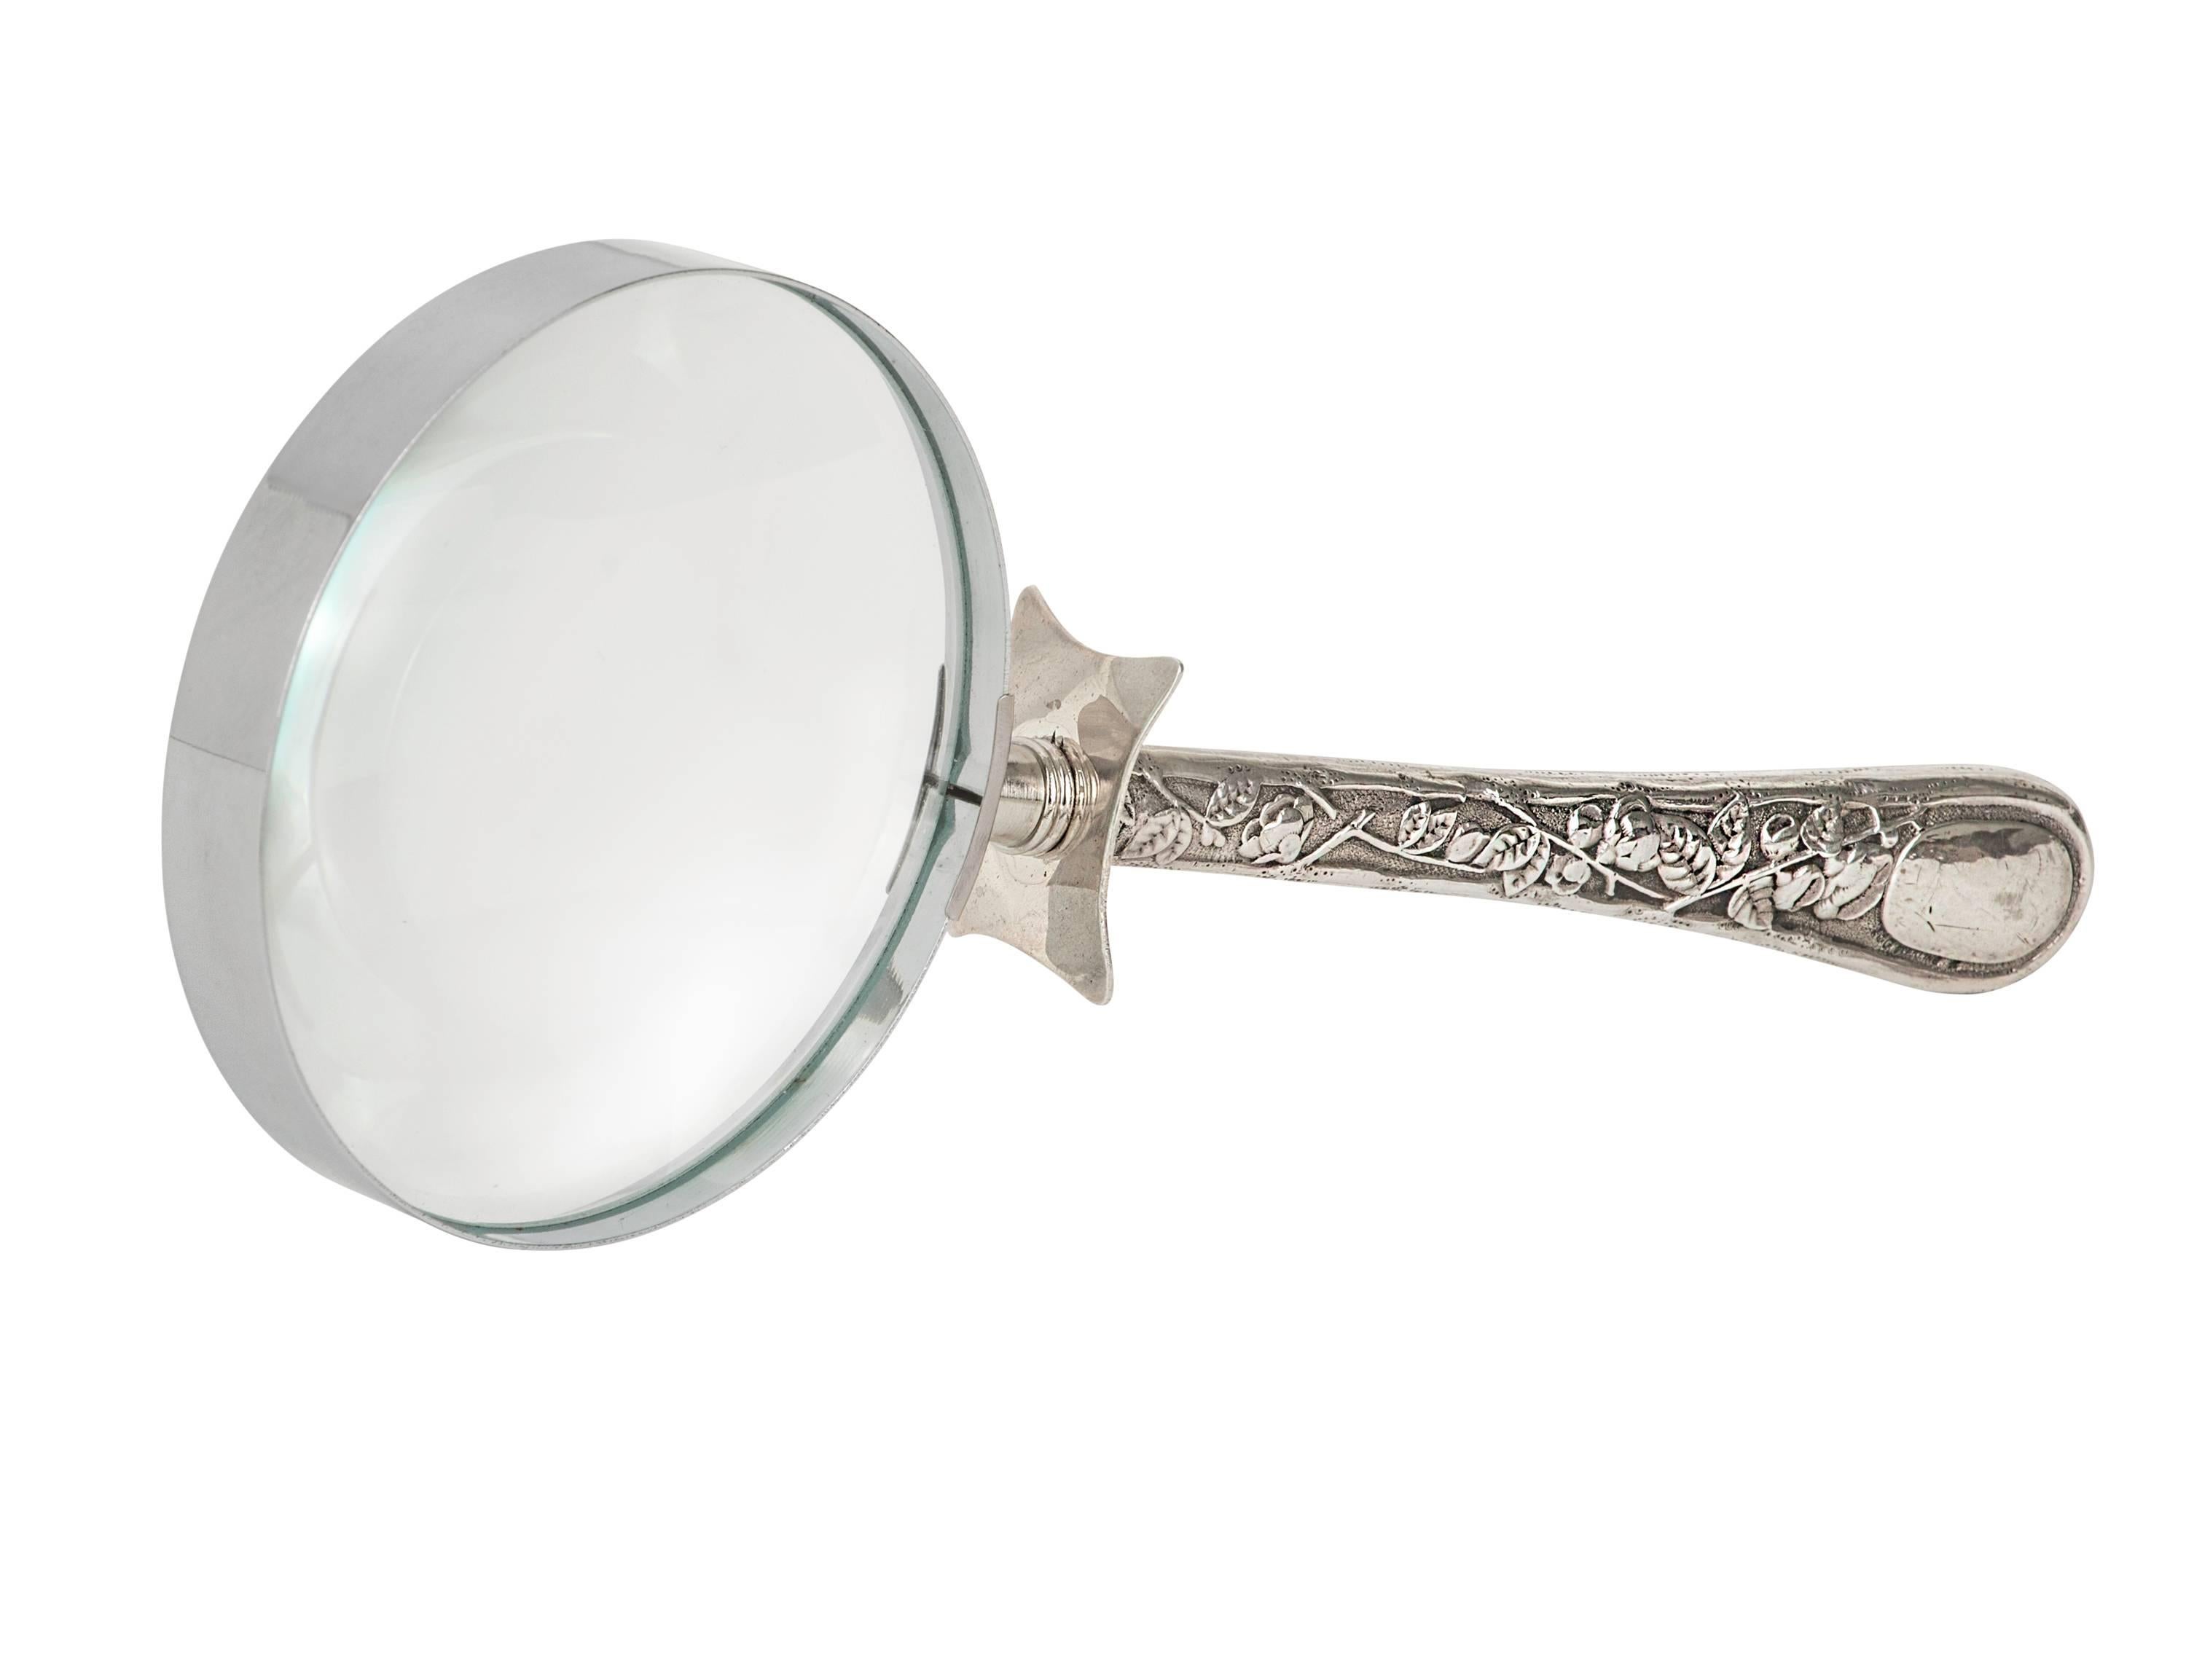 Lovely Gorham antique sterling silver handle magnifier. Hallmarked G Anchor and Sterling marked on top backside of the handle.